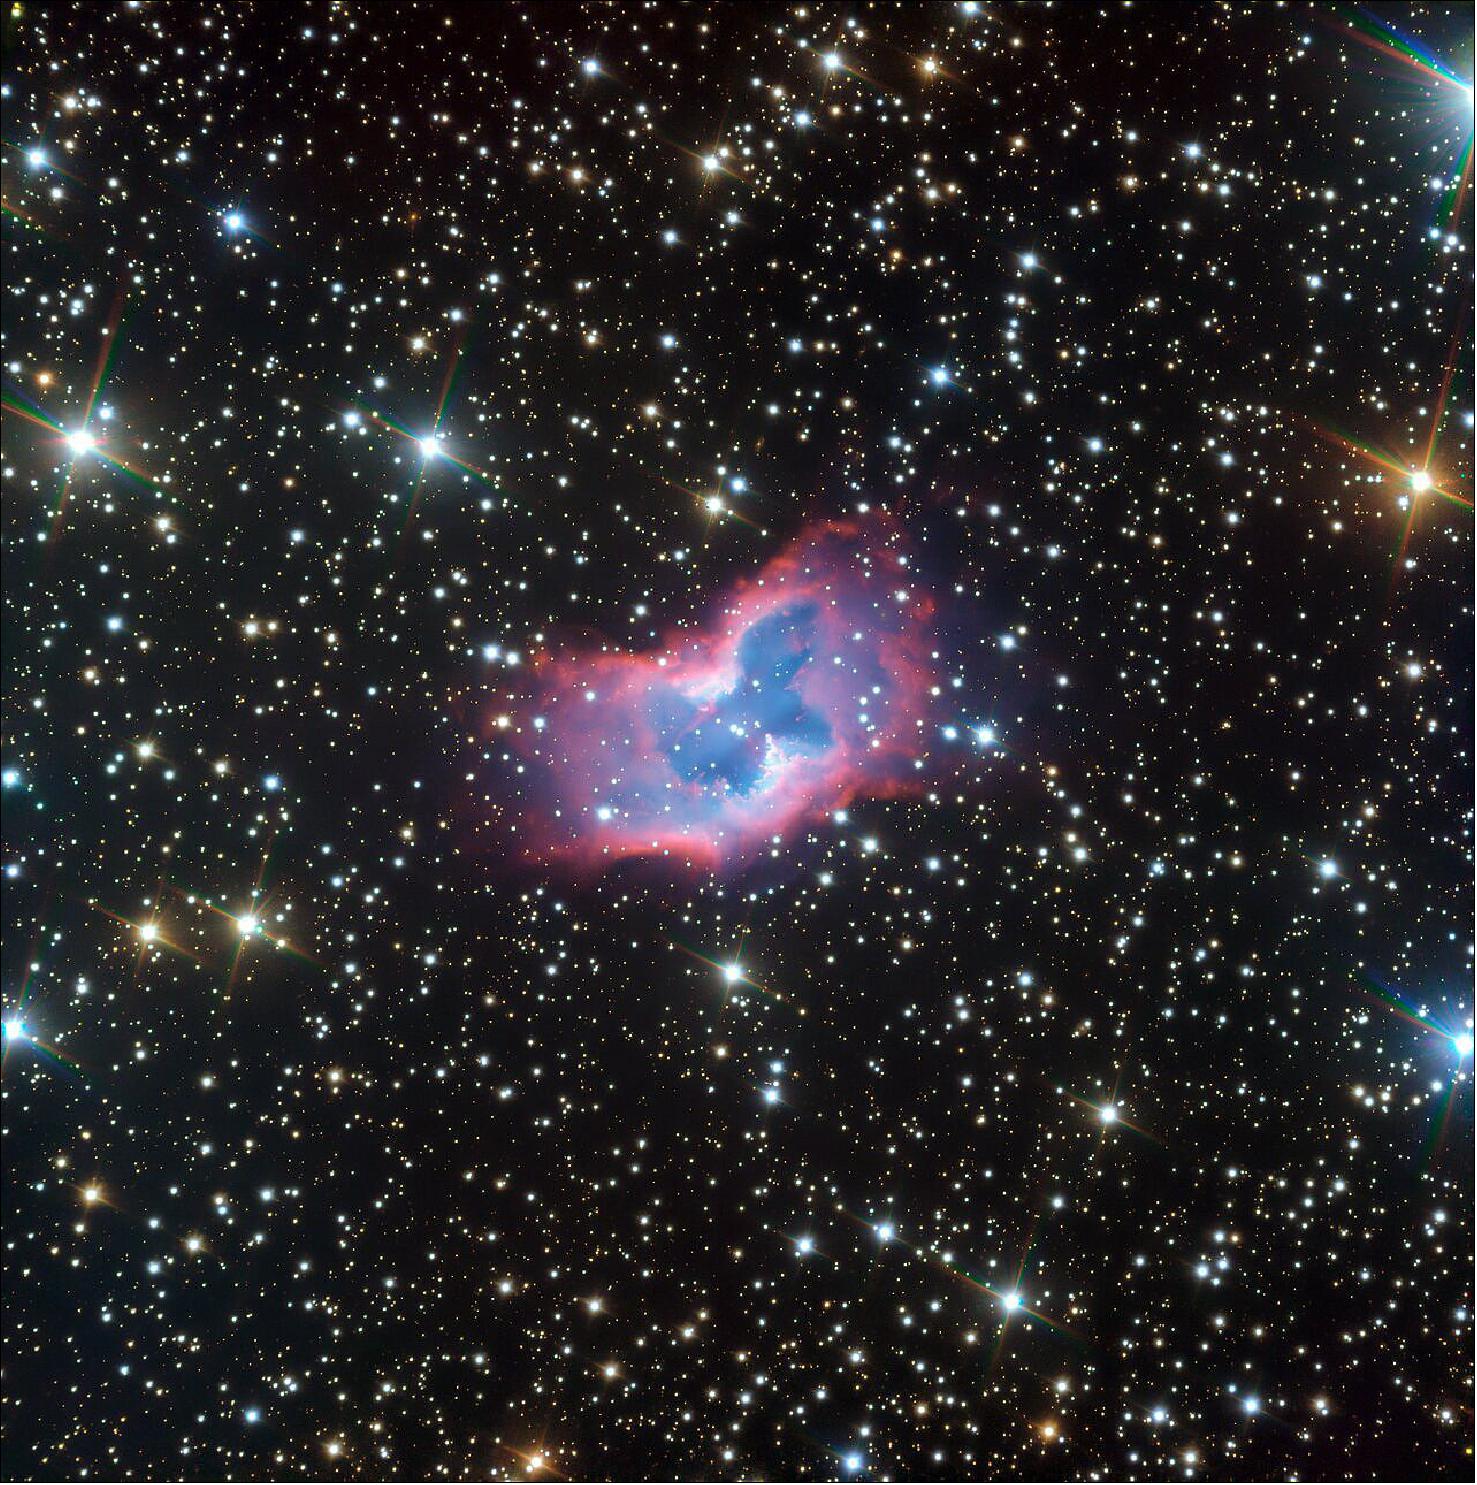 Figure 32: This highly detailed image of the fantastic NGC 2899 planetary nebula was captured using the FORS instrument on ESO’s VLT (Very Large Telescope) in northern Chile. This object has never before been imaged in such striking detail, with even the faint outer edges of the planetary nebula glowing over the background stars (image credit: ESO)